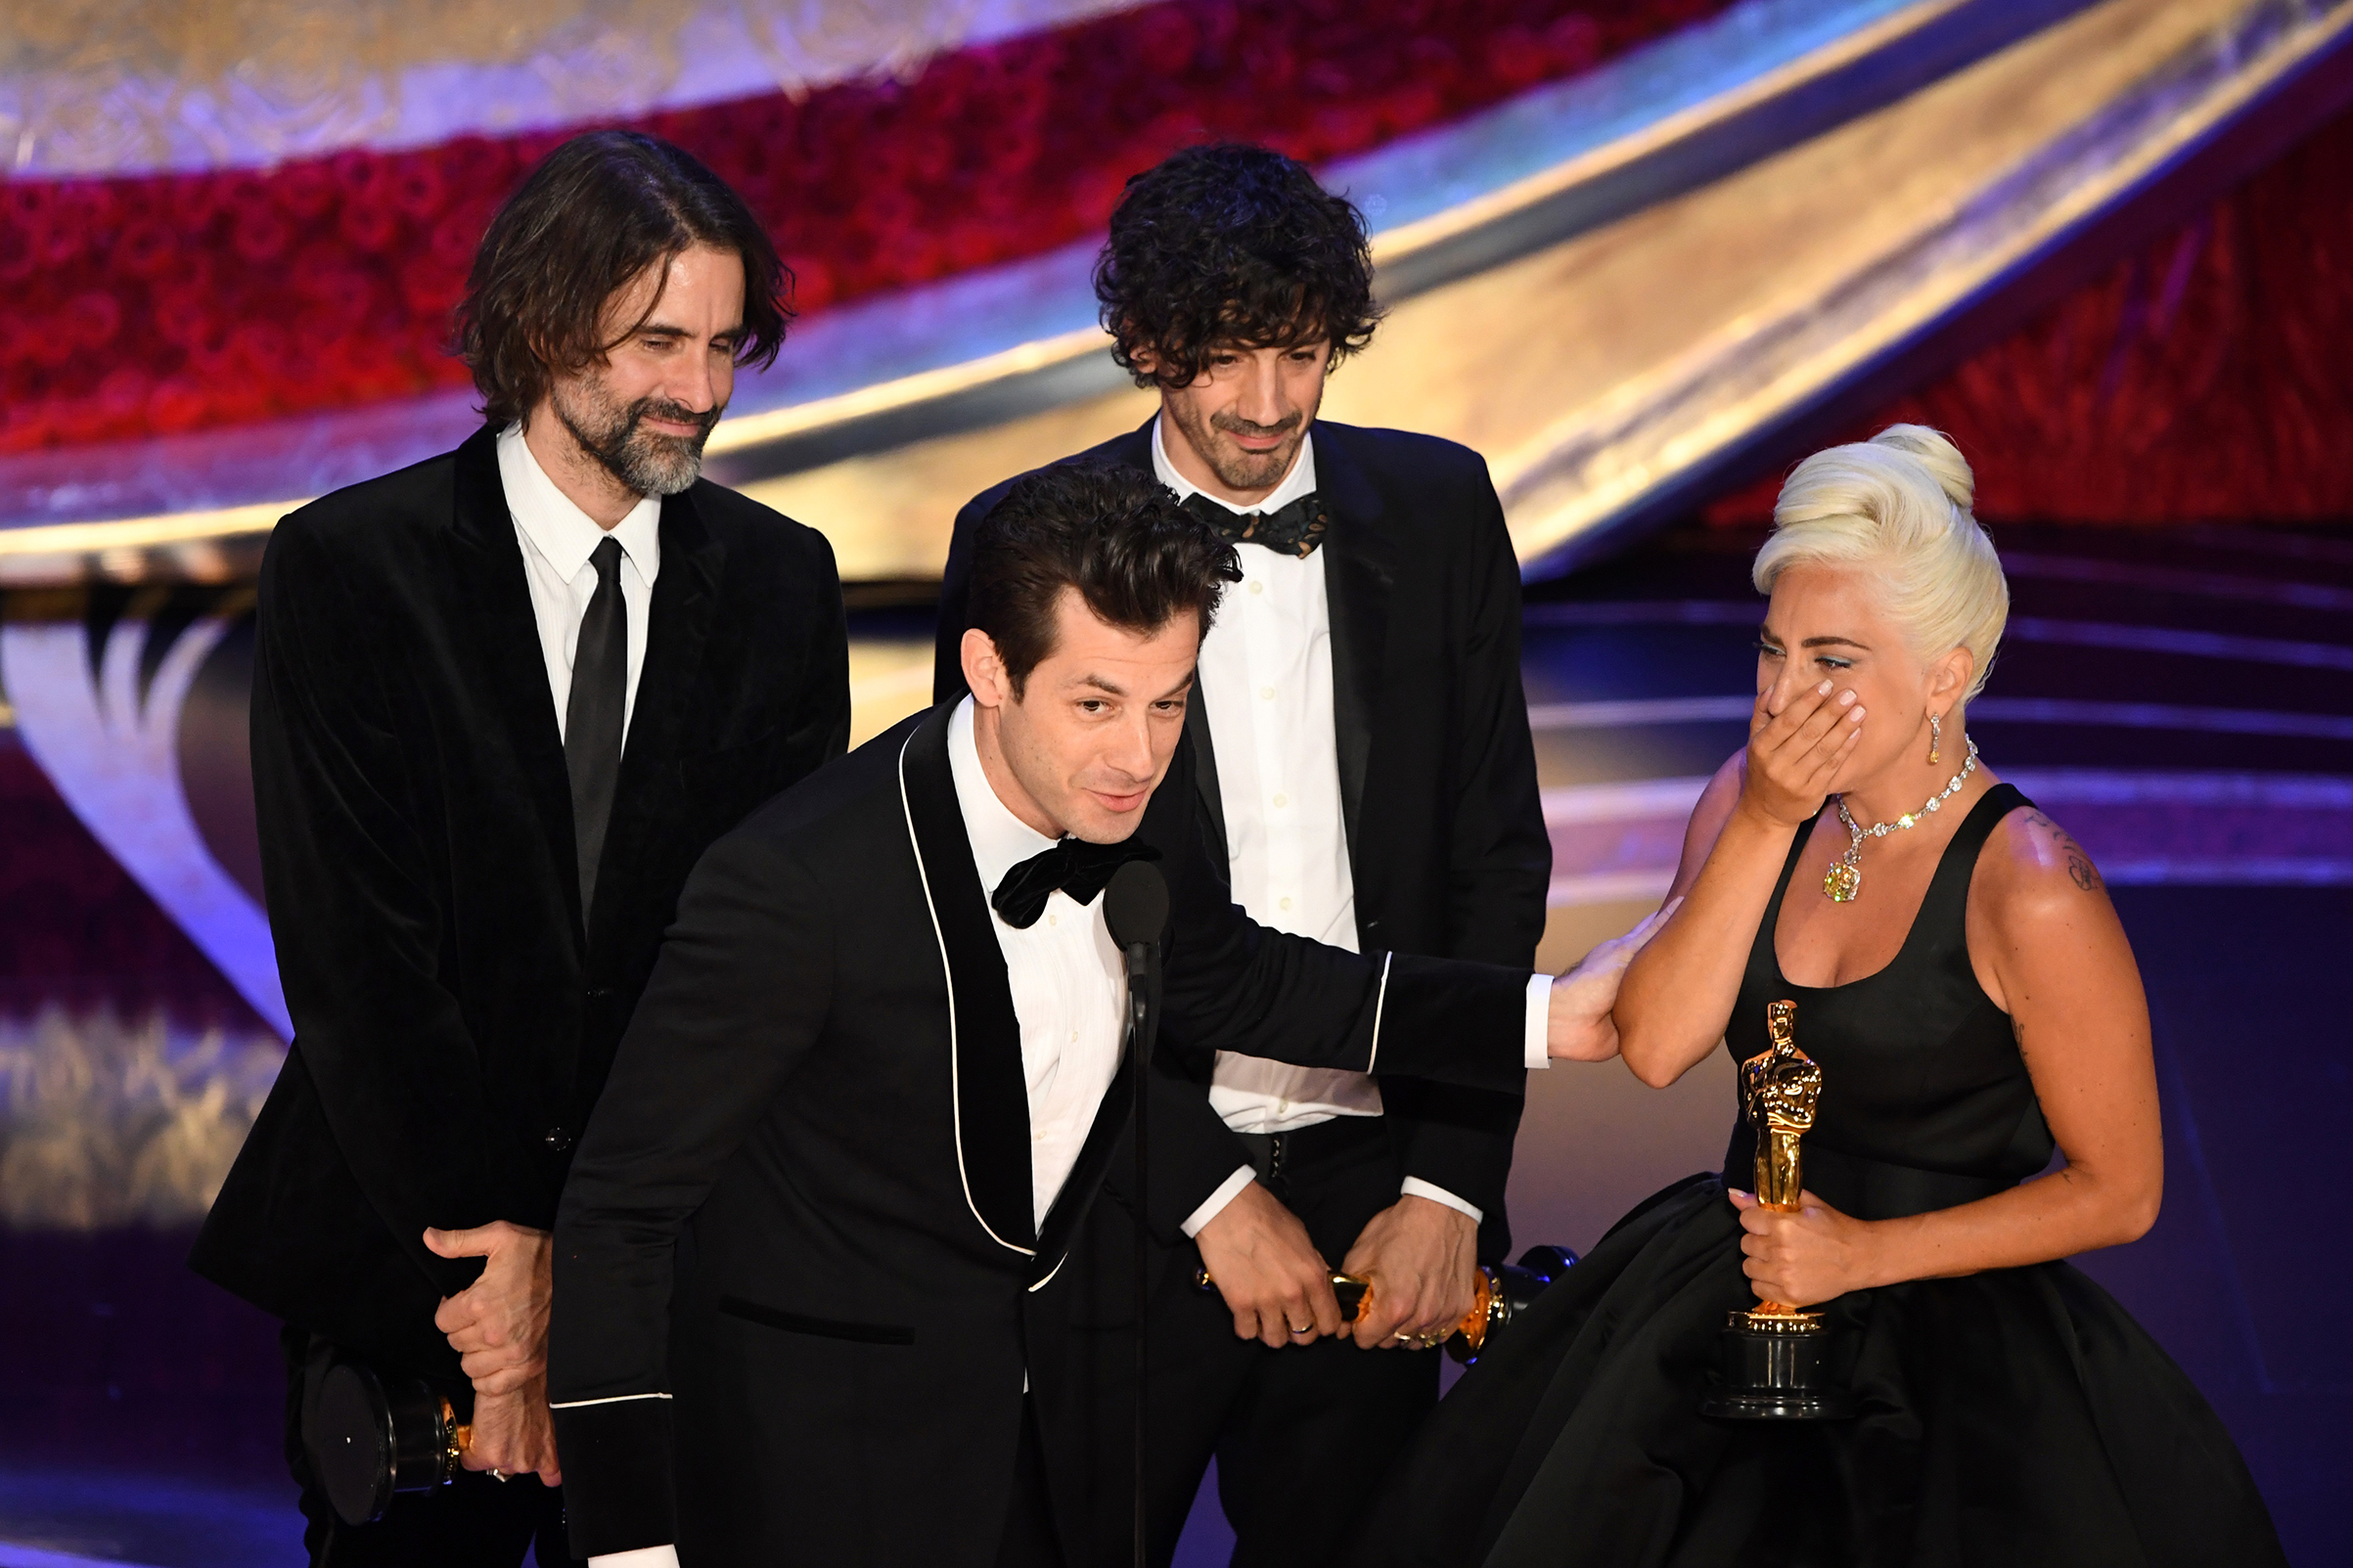 Best Original Song nominees for "Shallow" from "A Star is Born" Lady Gaga, Mark Ronson, Anthony Rossomando and Andrew Wyatt accept the award for Best Original Song during the 91st Annual Academy Awards at the Dolby Theatre in Hollywood, California on Feb. 24, 2019. (Valerie Macon—AFP/Getty Images)